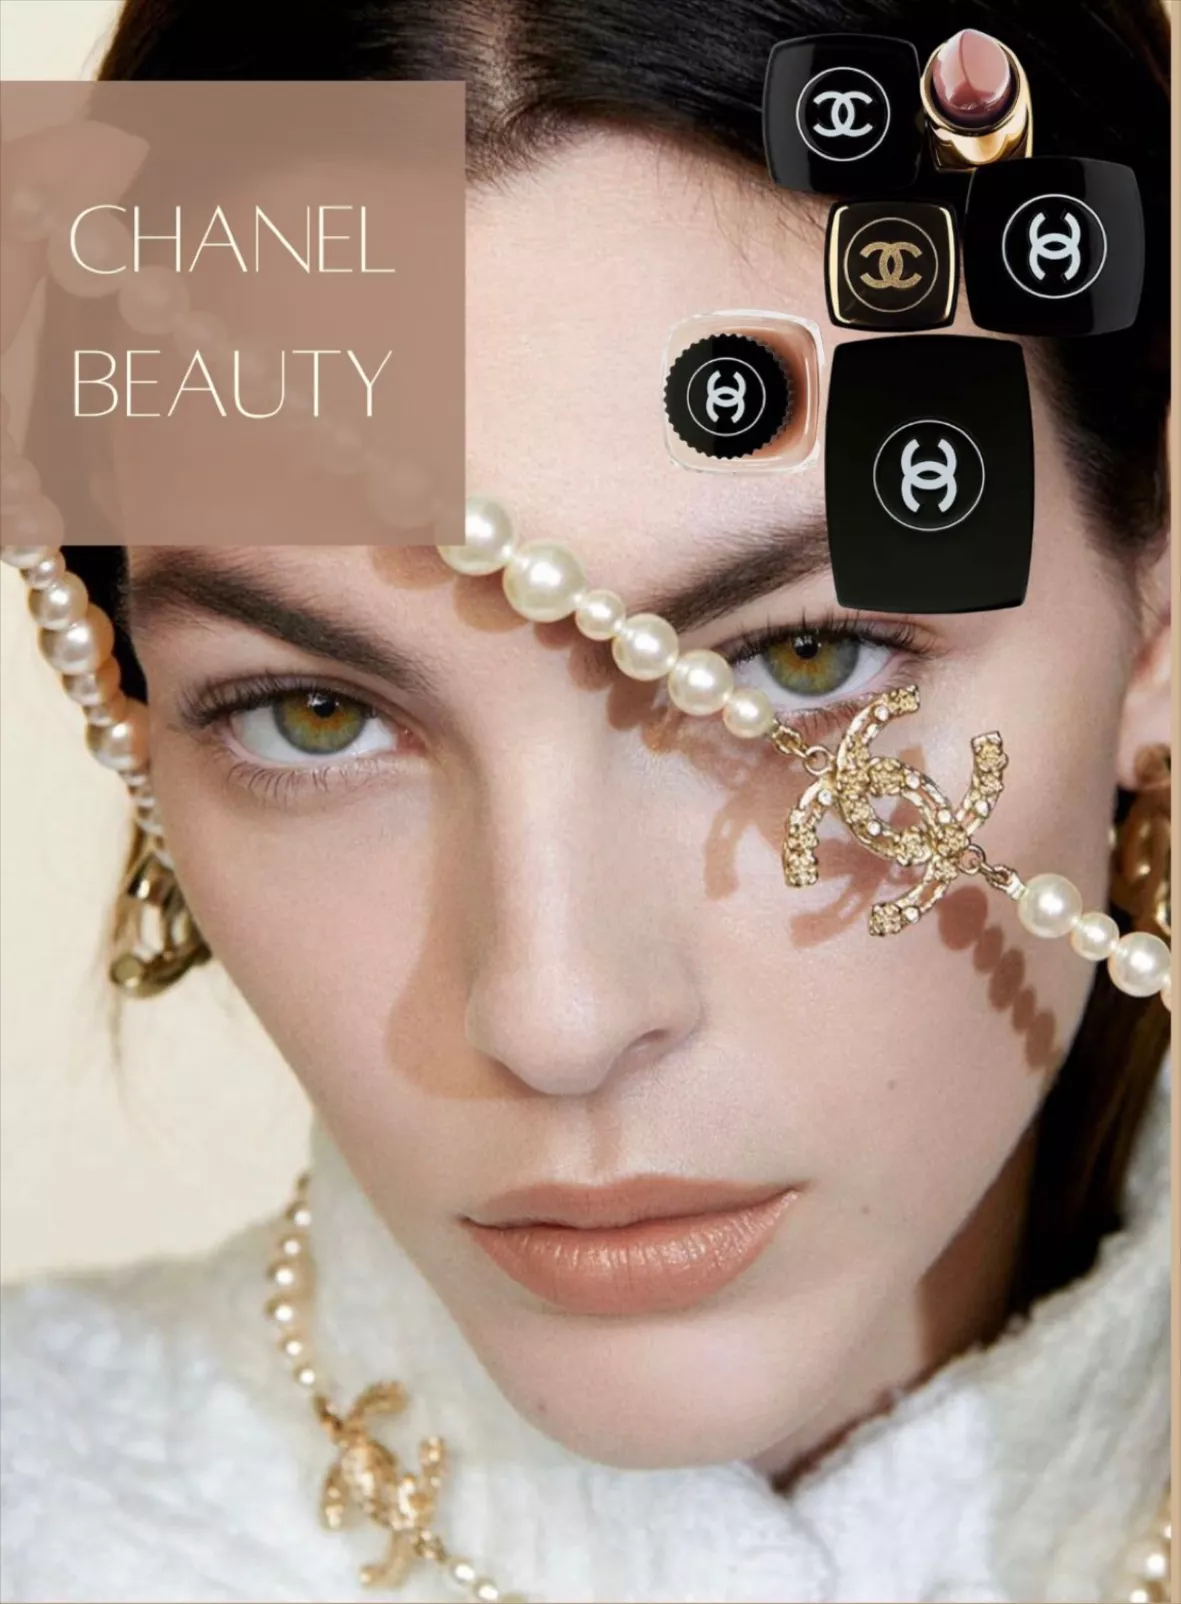 NEW CHANEL 2022 BEAUTY SET IS OUT NOW! 